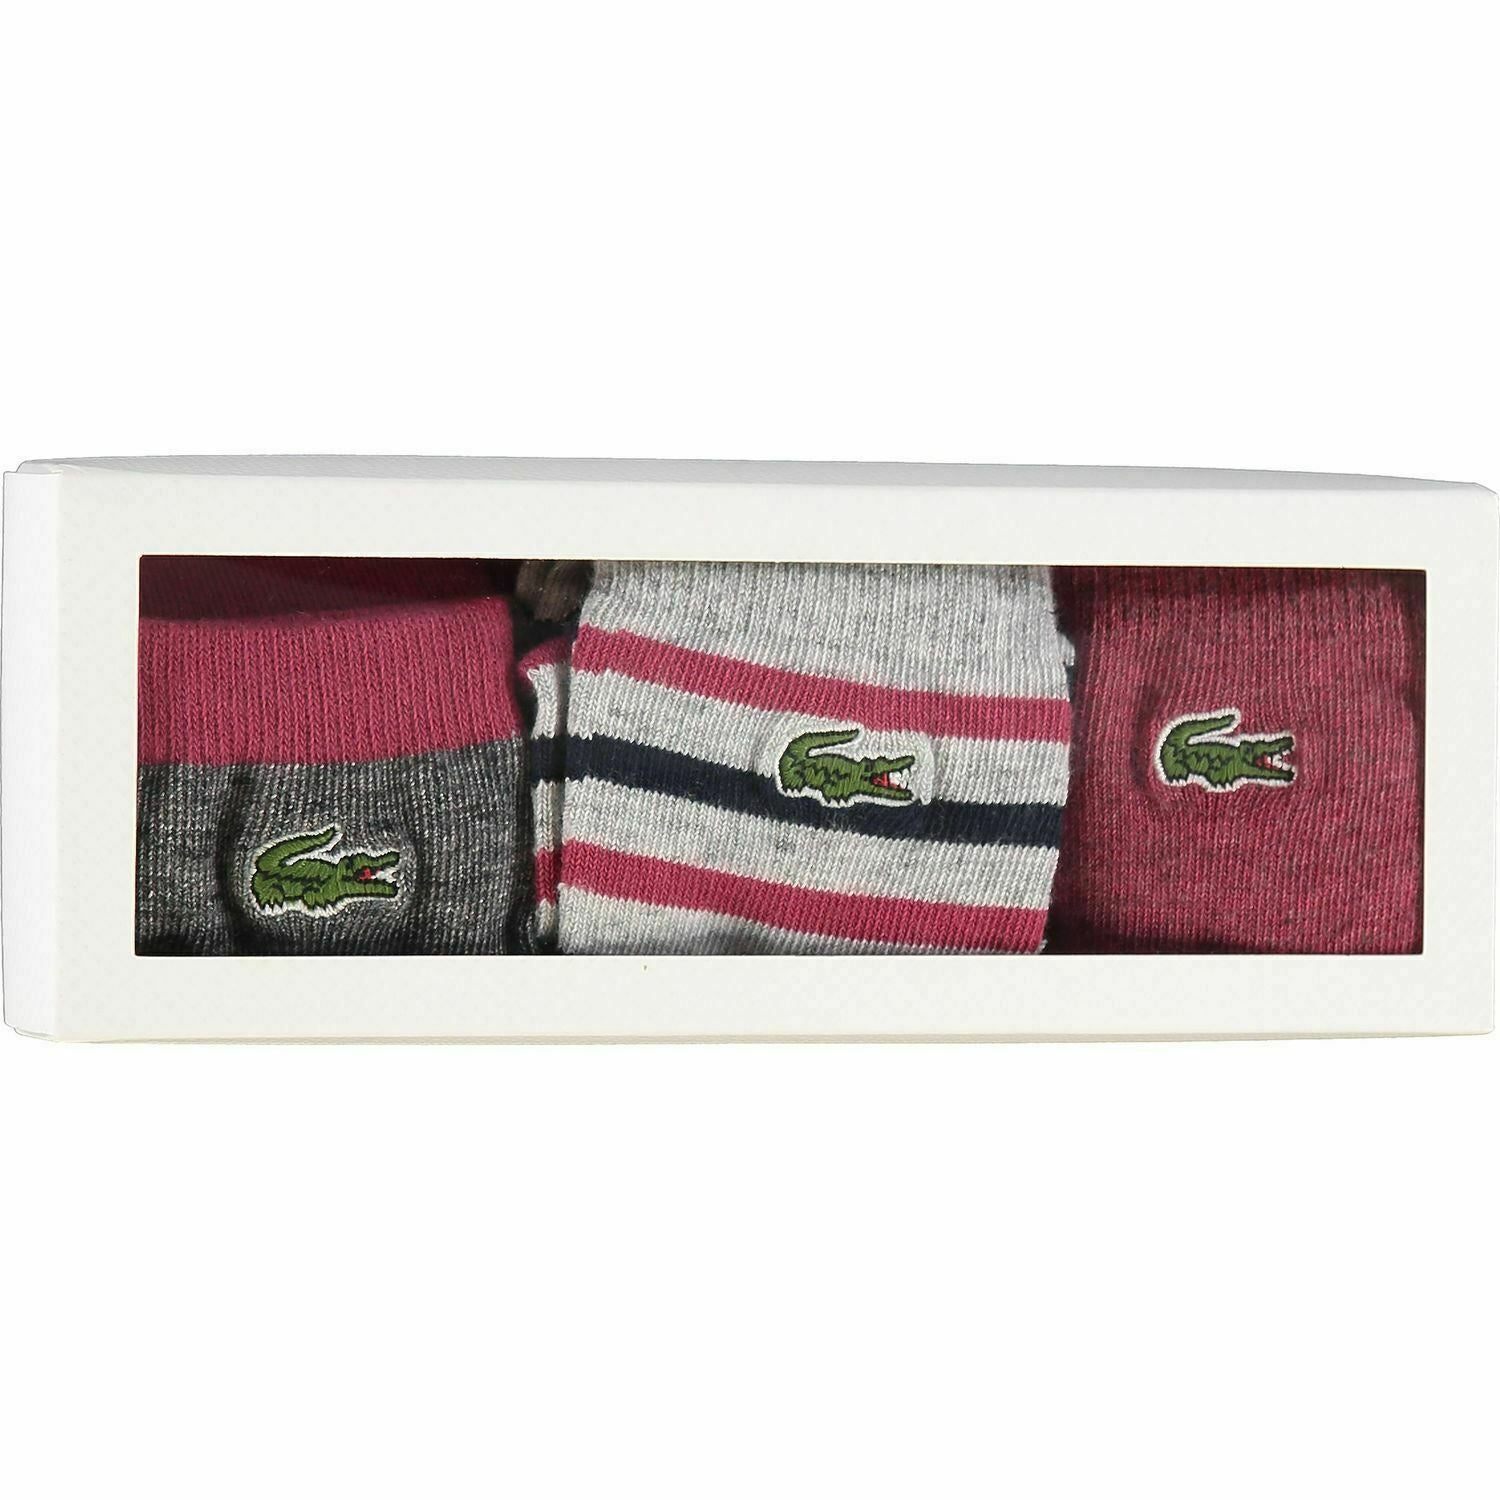 LACOSTE Boys' 3-Pack Raspberry Red & Grey Socks Set, size 4 years